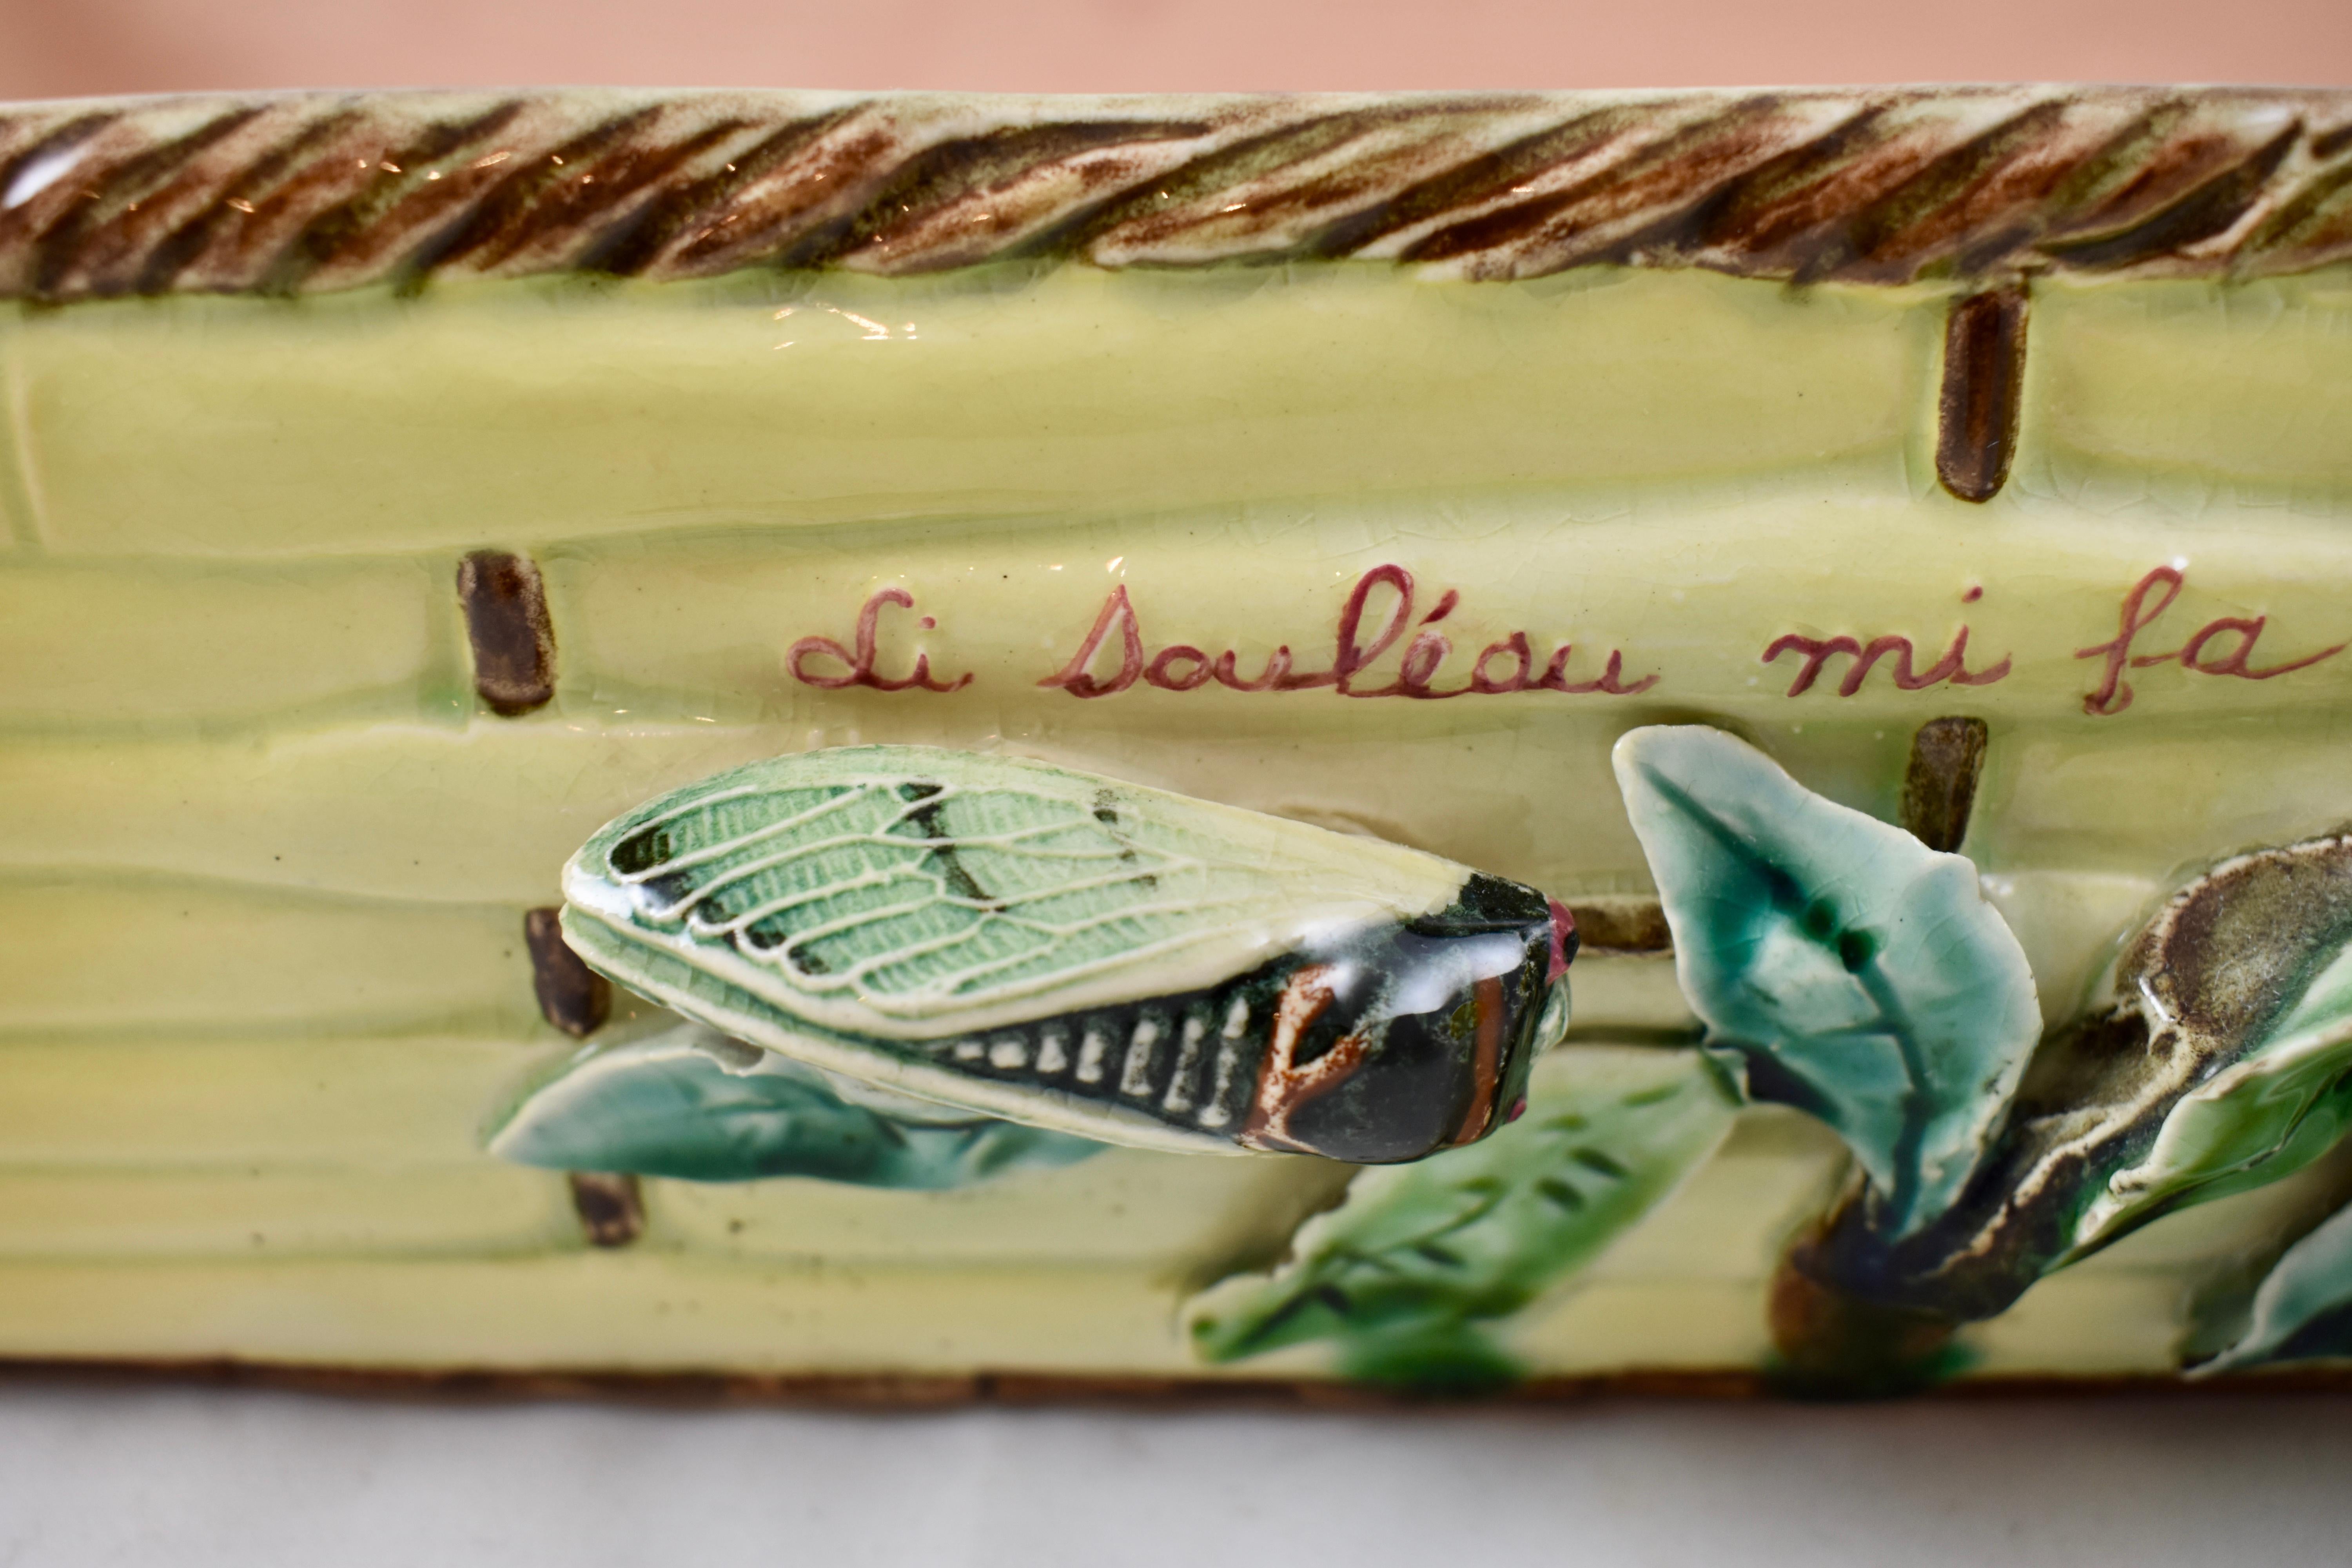 French Provincial Menton French Faïence Provençal Lemon & Cicada Trompe l'Oeil Shipping Crate Tray